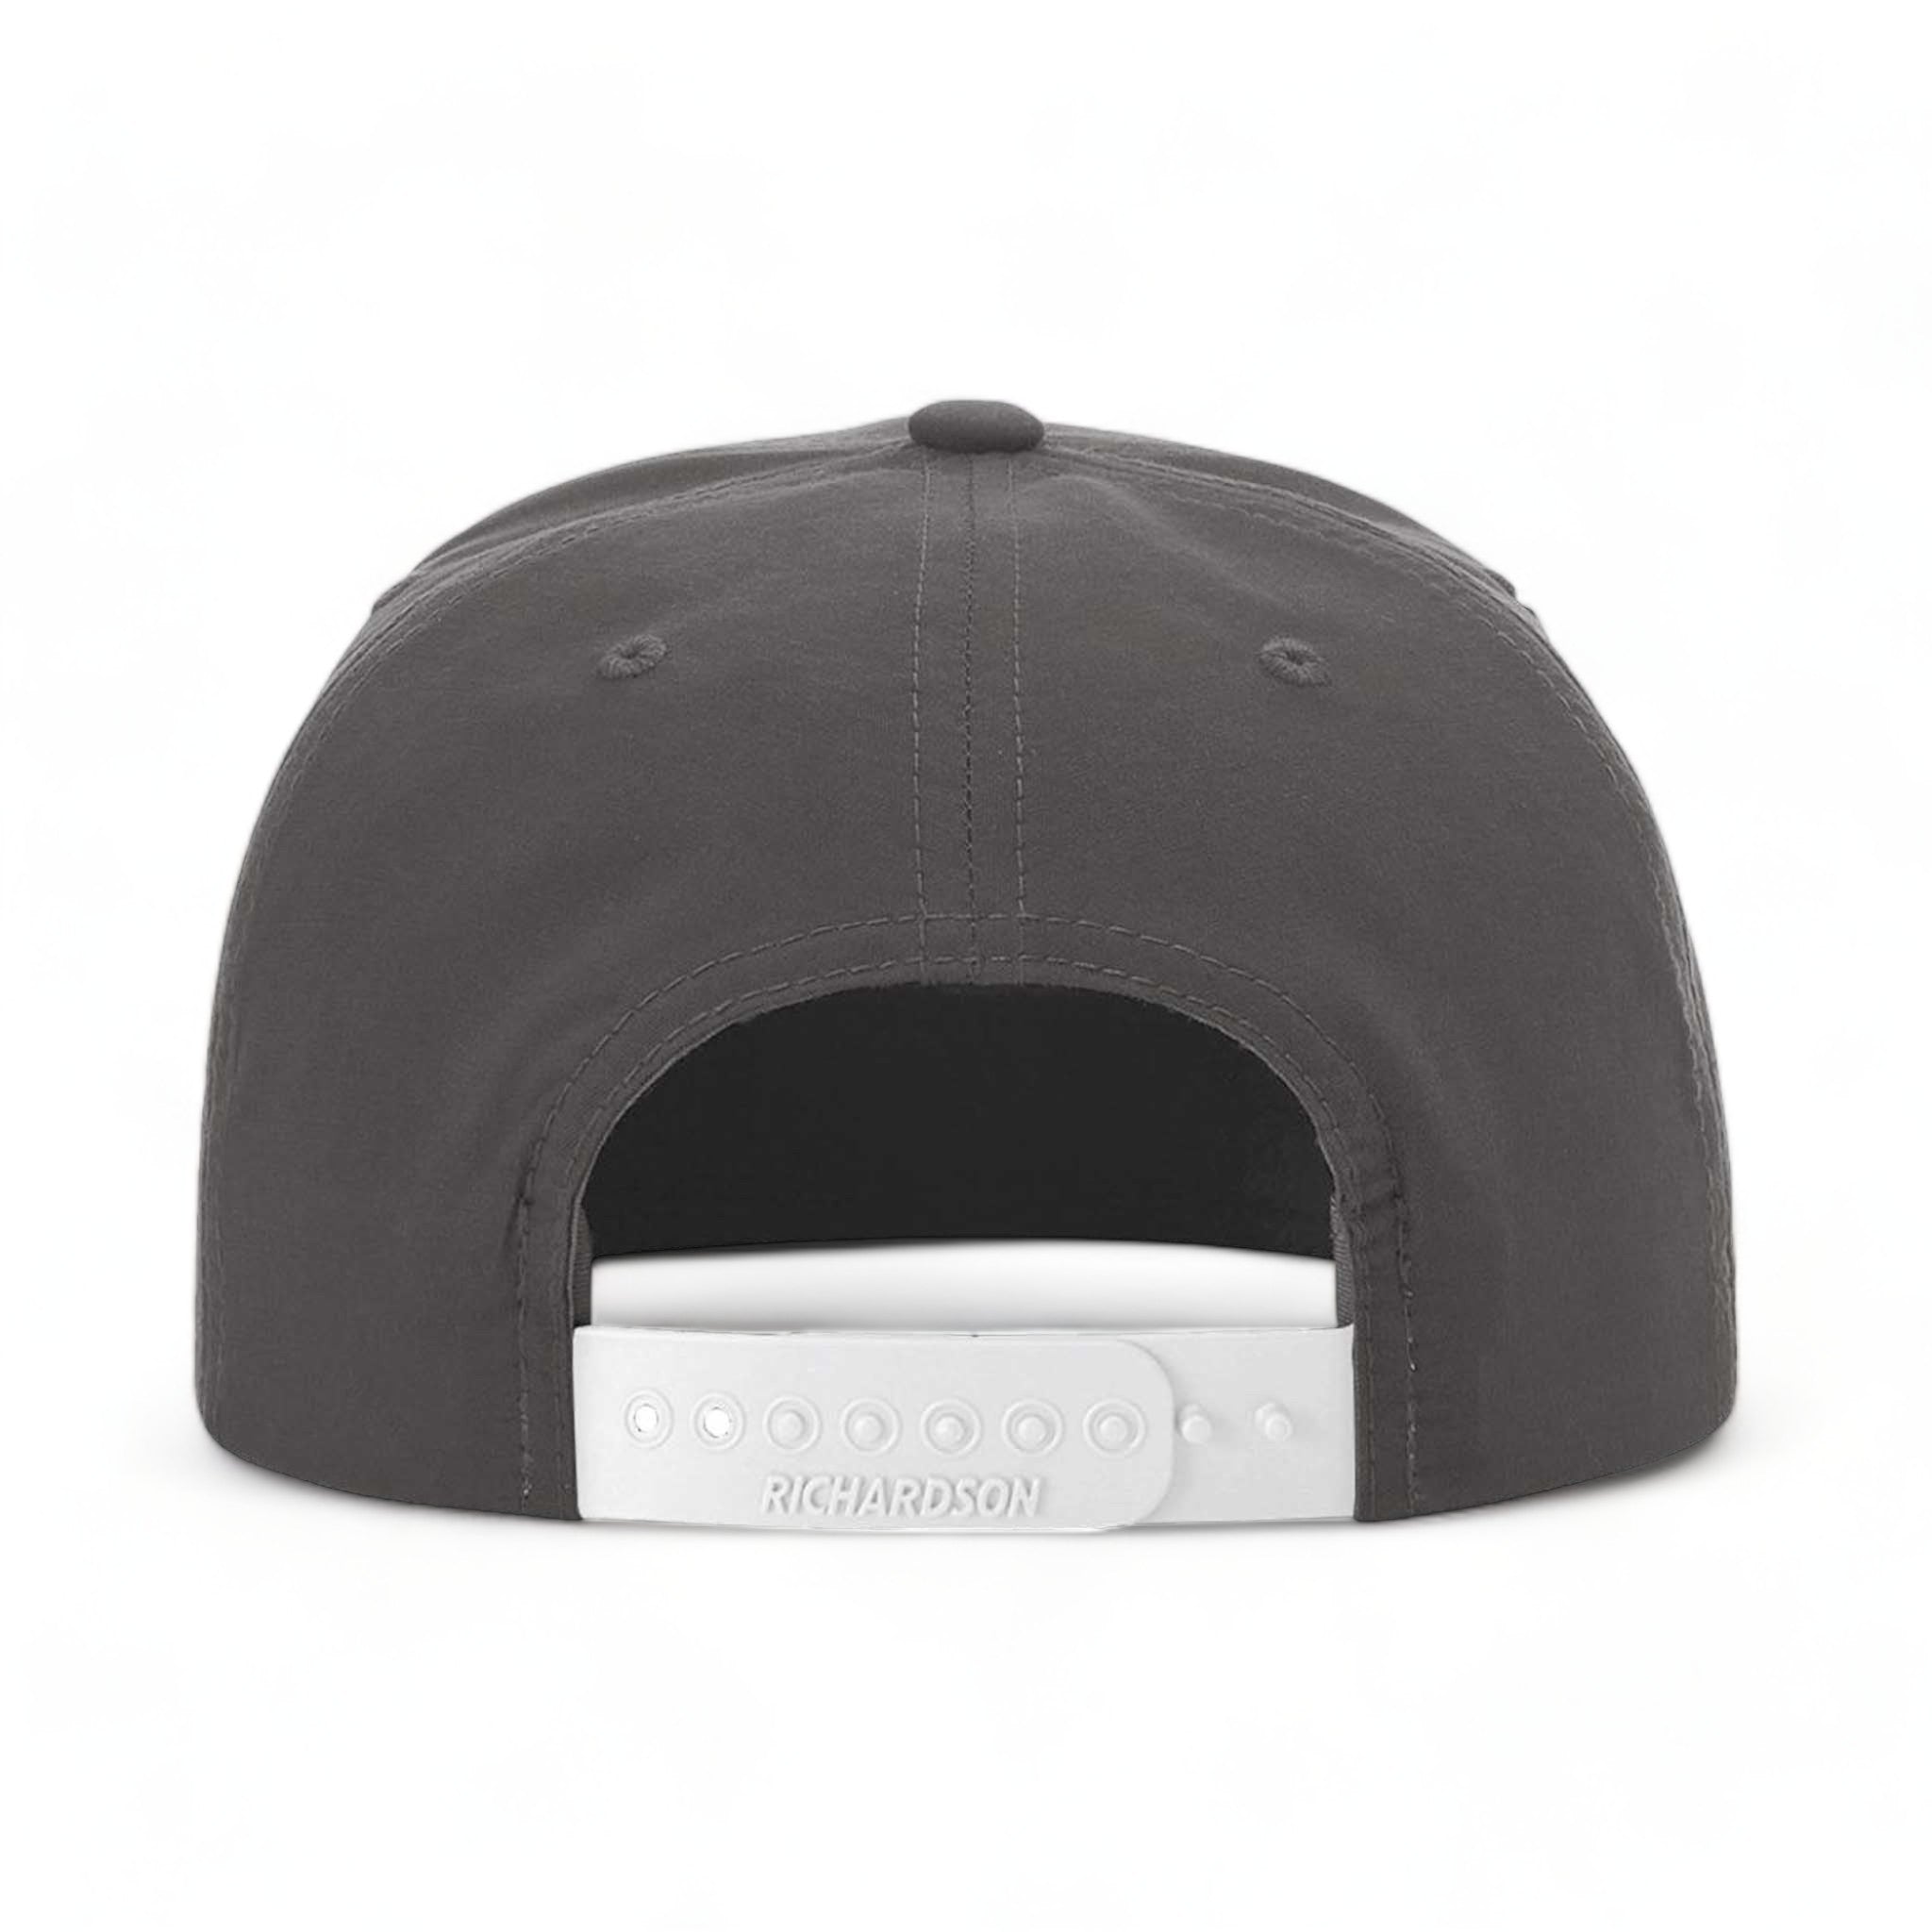 Back view of Richardson 256 custom hat in charcoal and white